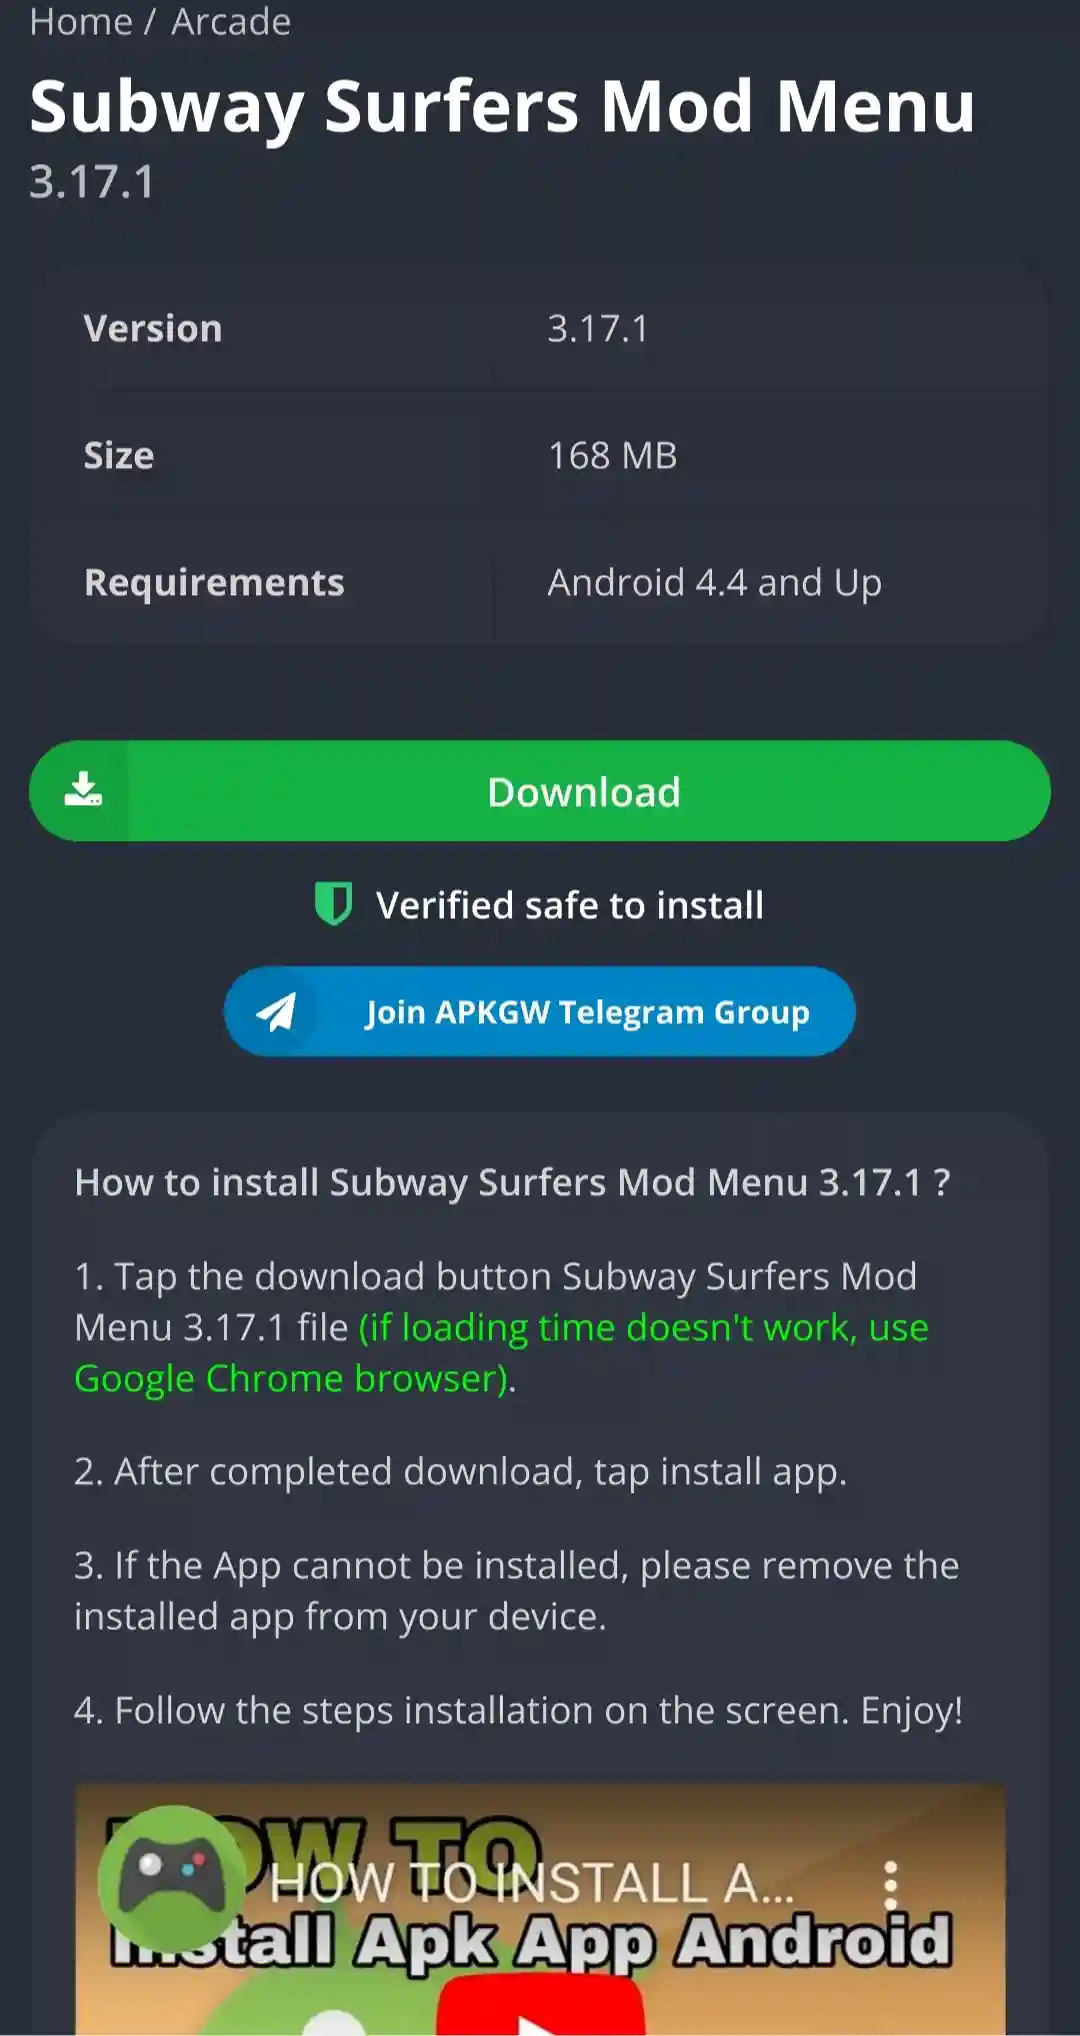 How to download apkgw